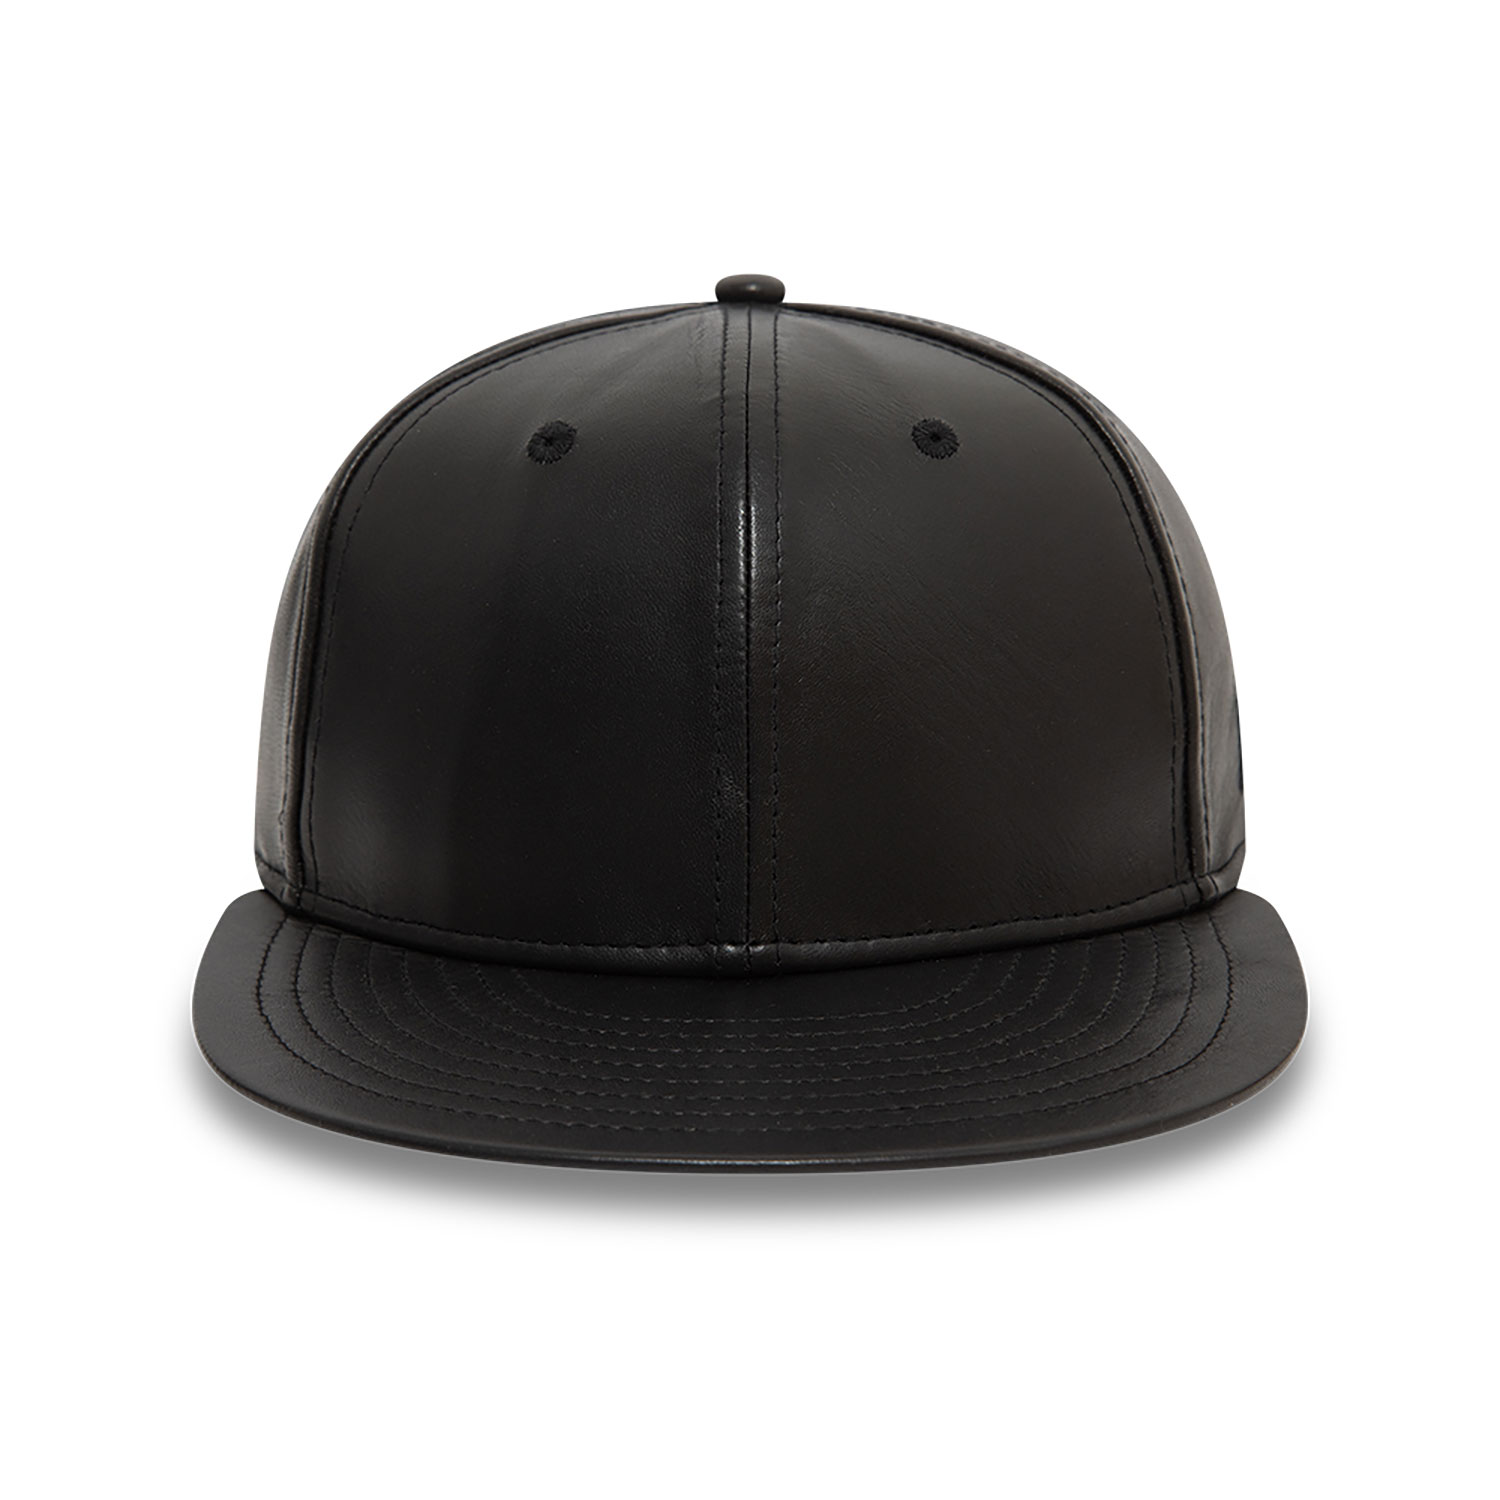 New Era Leather Black 59FIFTY Fitted Cap